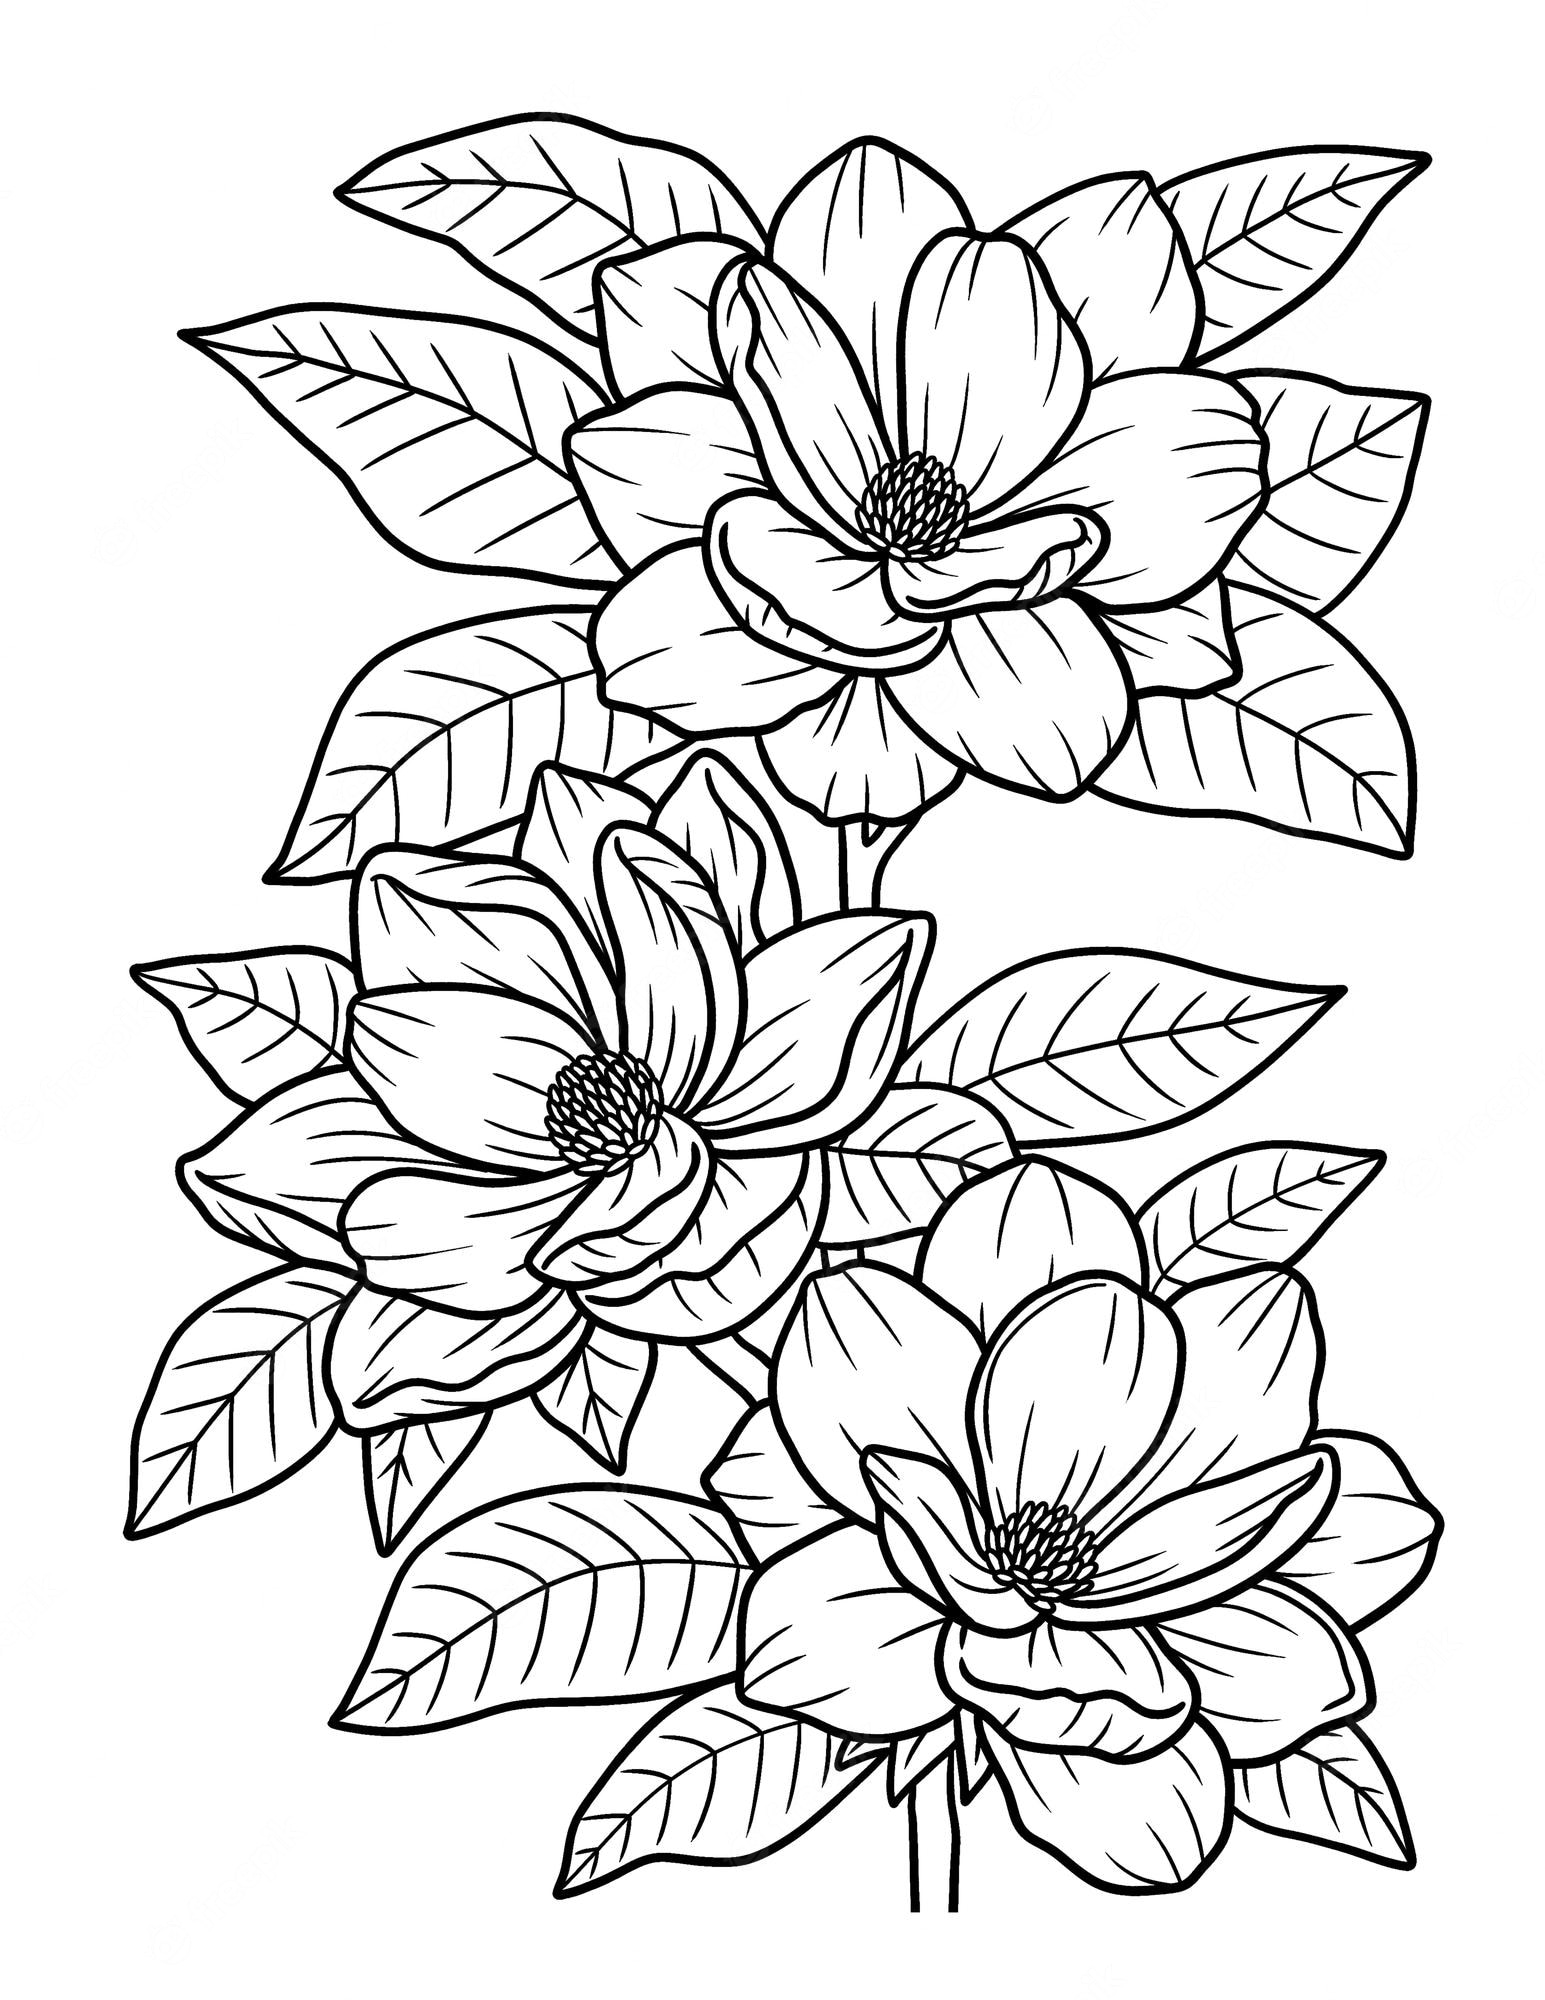 Floral coloring page Vectors & Illustrations for Free Download | Freepik